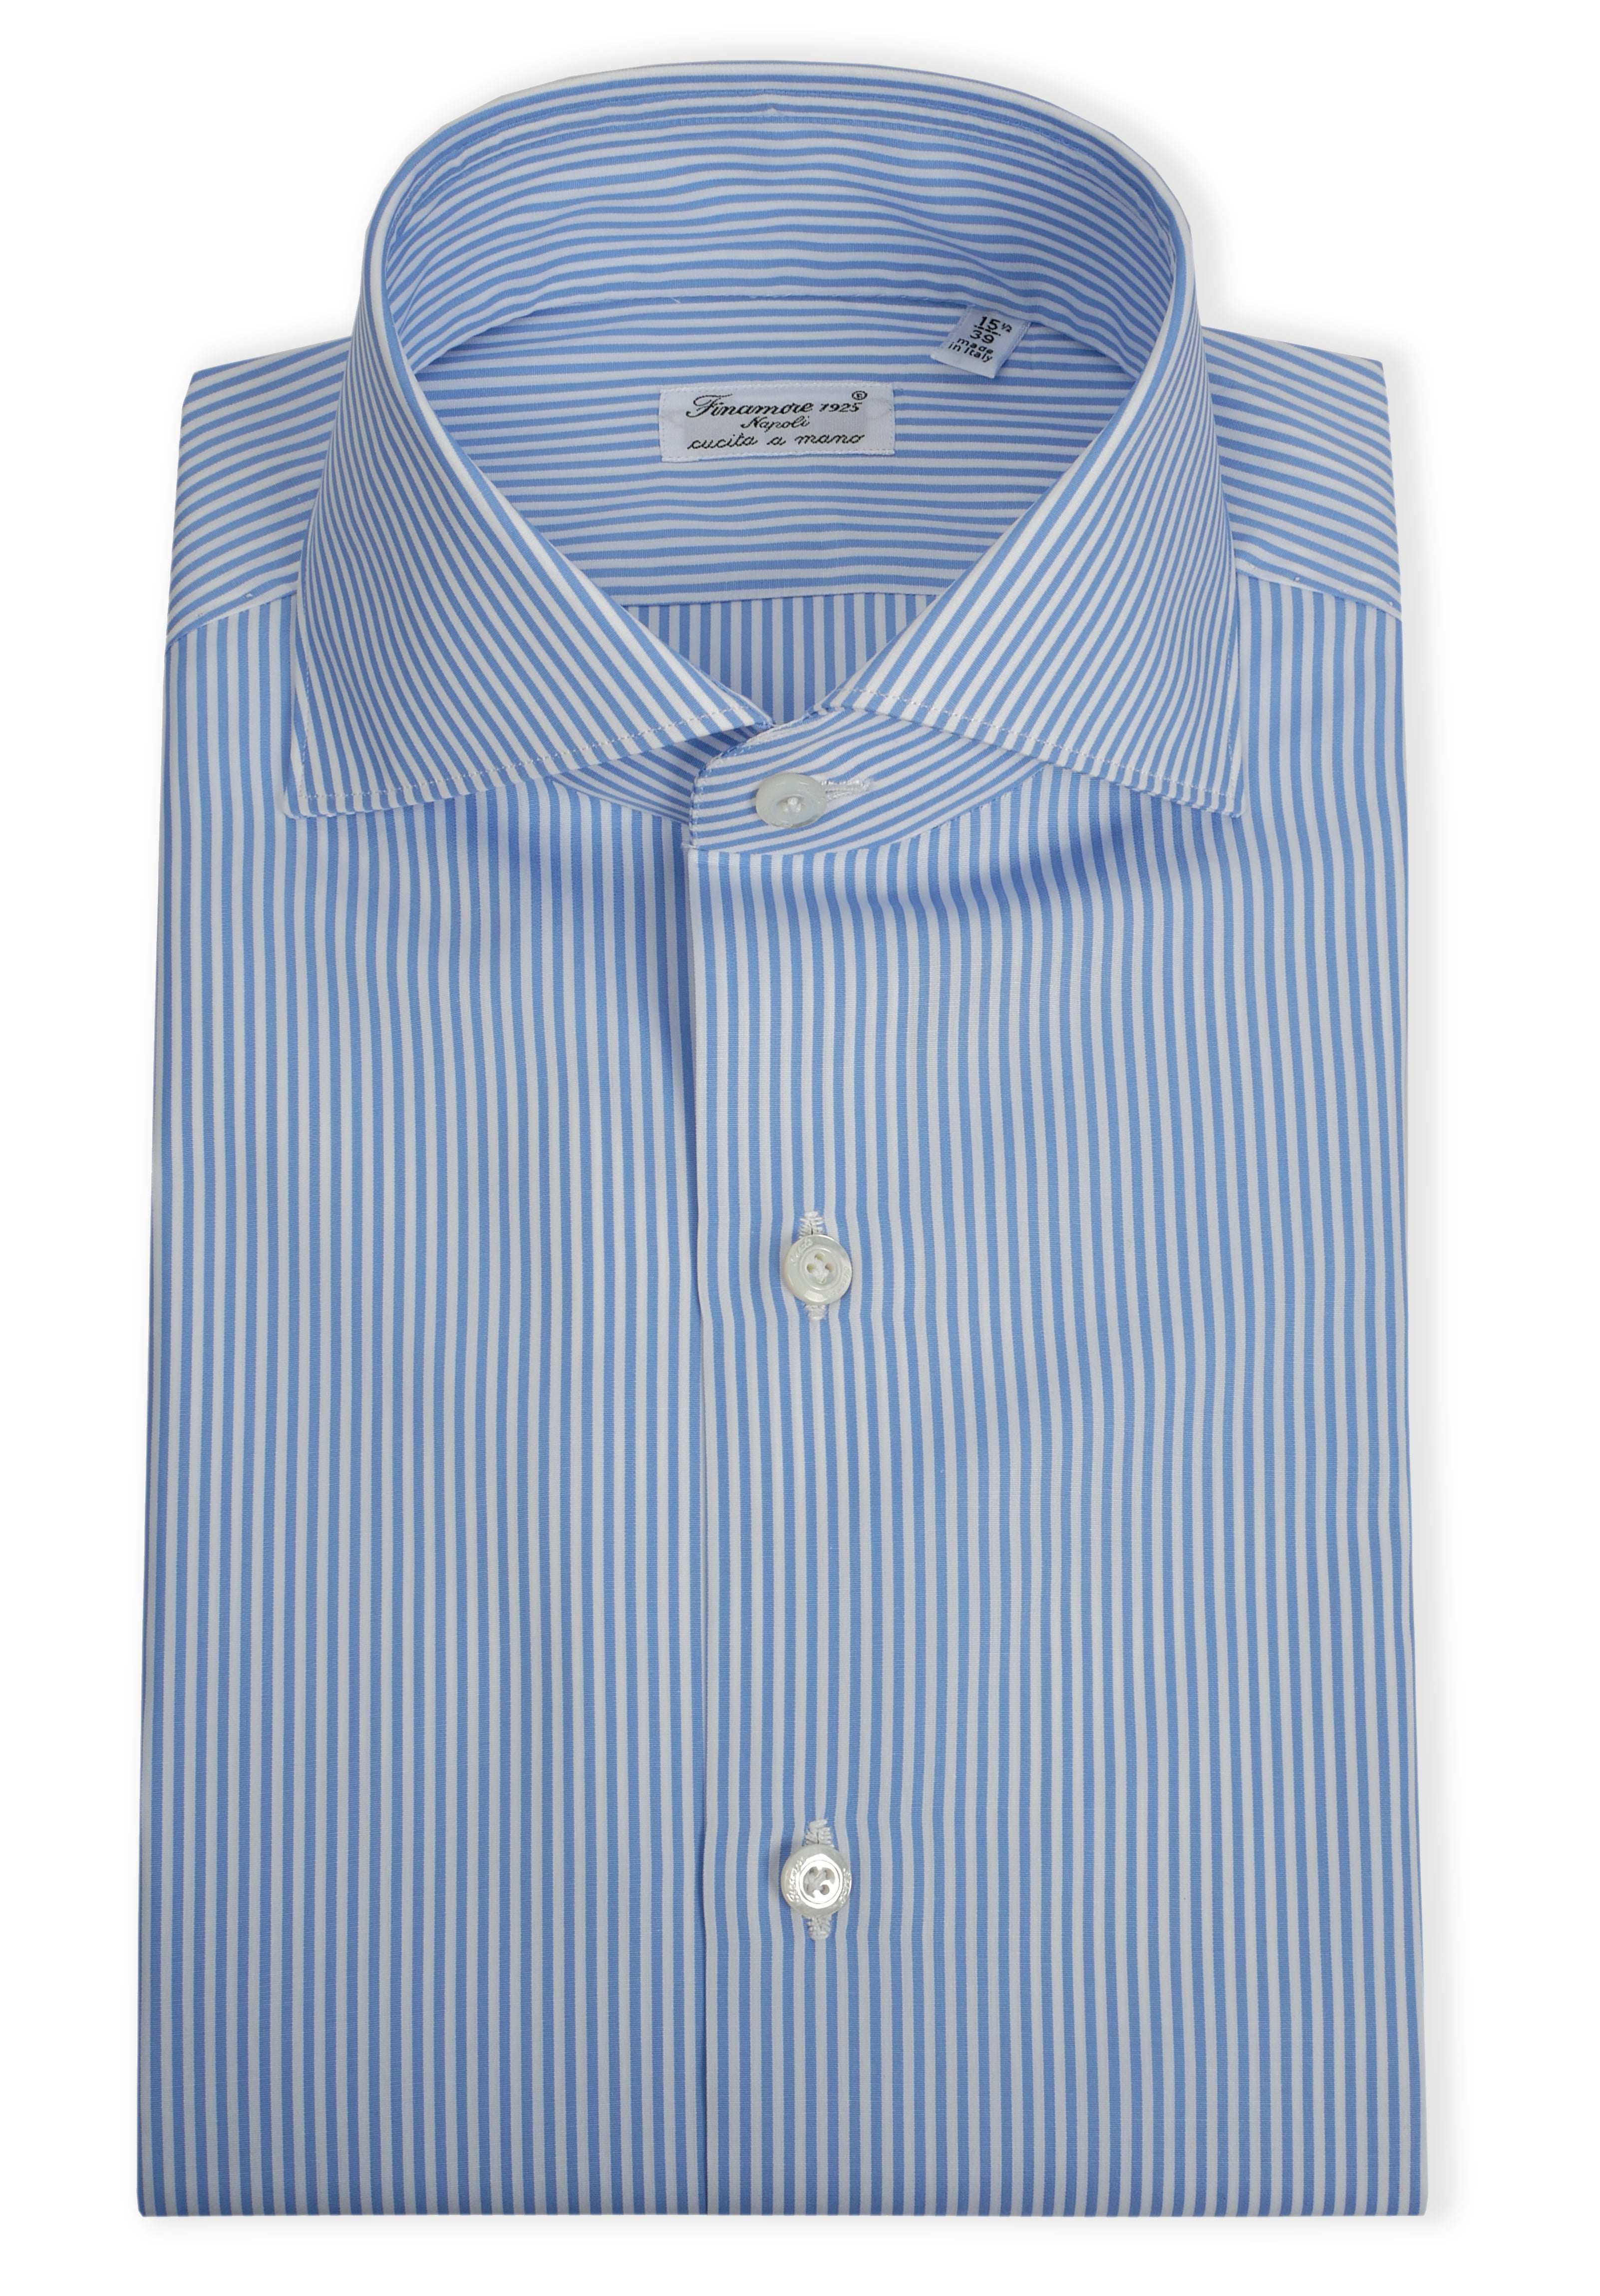 TAILORED SHIRT IN DOUBLE TWISTED POPLIN COTTON MILAN LABEL